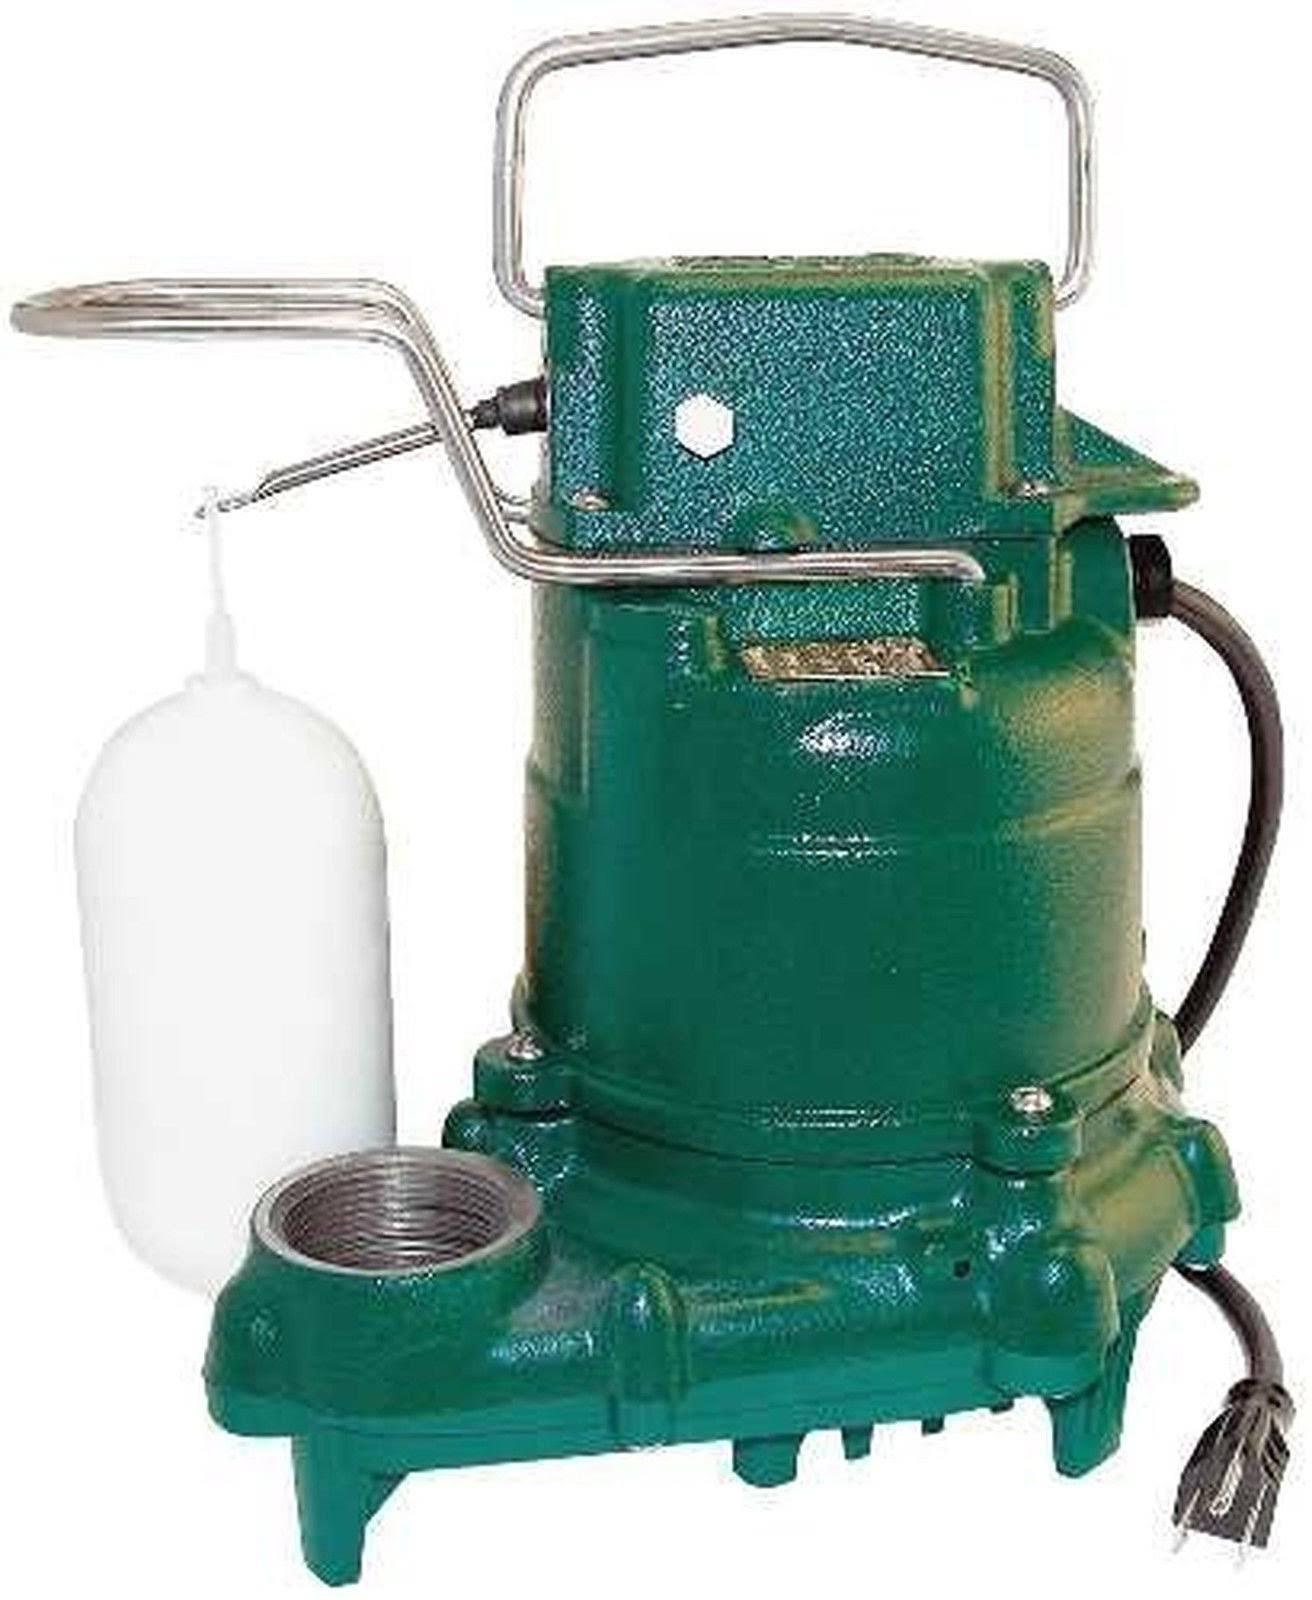 Zoeller M53 Mighty Mate Submersible Sump Pump - 1/3 hp, 115V